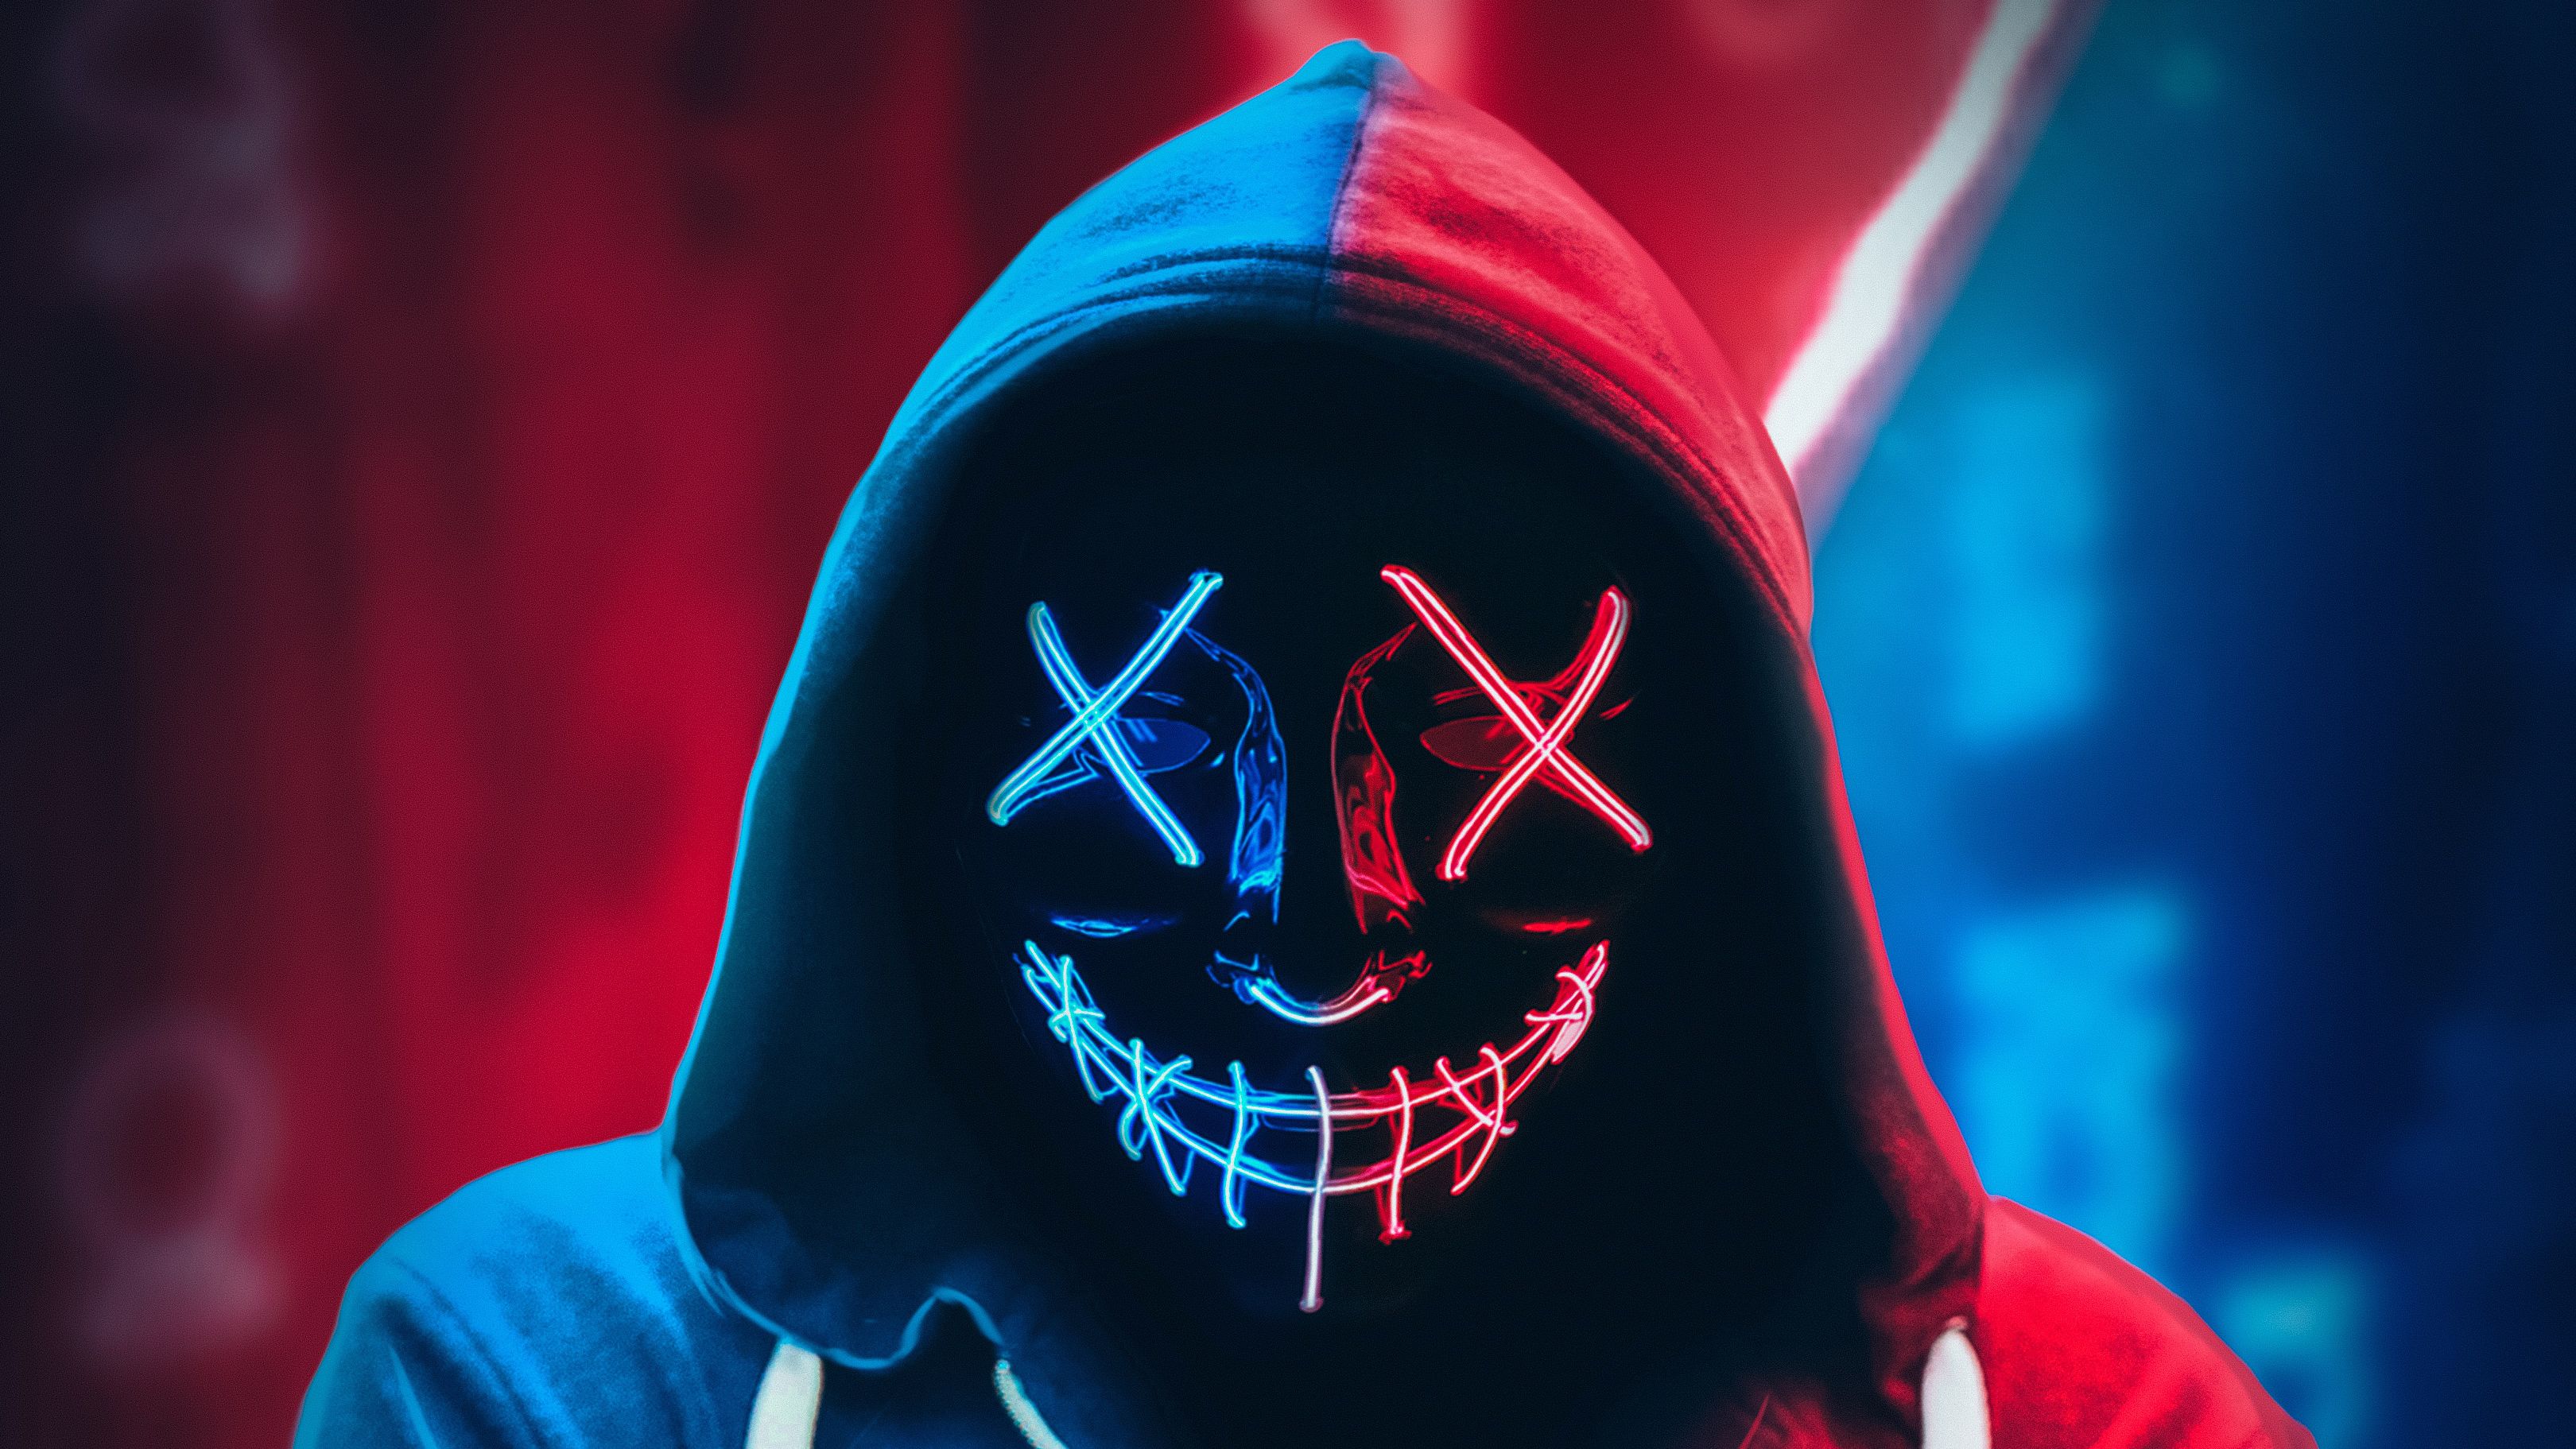 Neon Mask Hoodie 4k, HD Photography, 4k Wallpaper, Image, Background, Photo and Picture